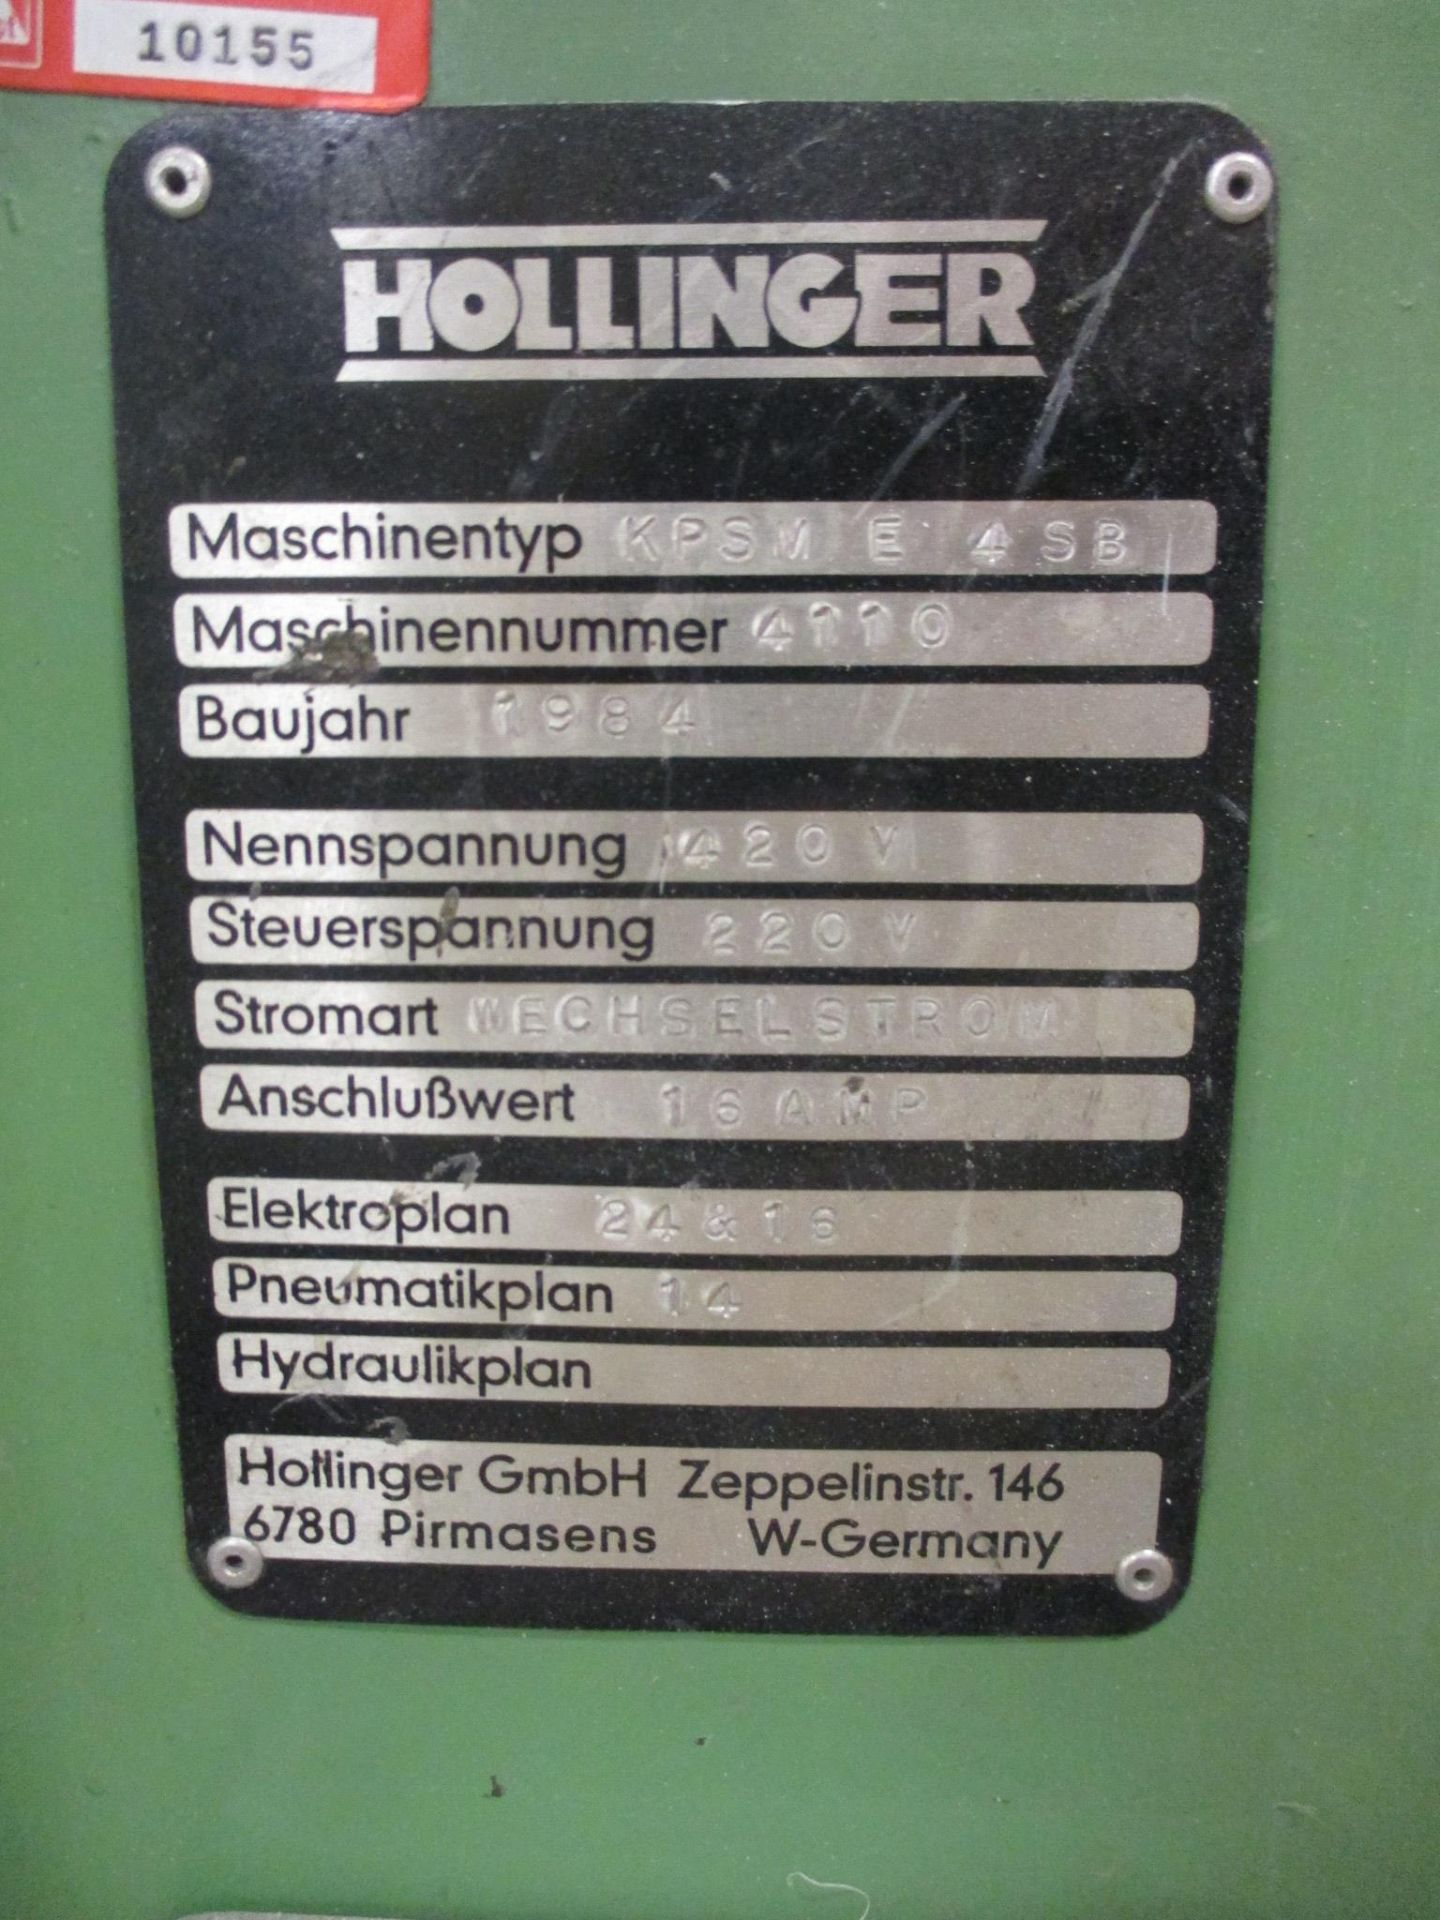 1: Hollinger, KPSM E 4SB, Butt Welder, Serial Number: 4110, Year of Manufacture: 1984 - Image 2 of 4